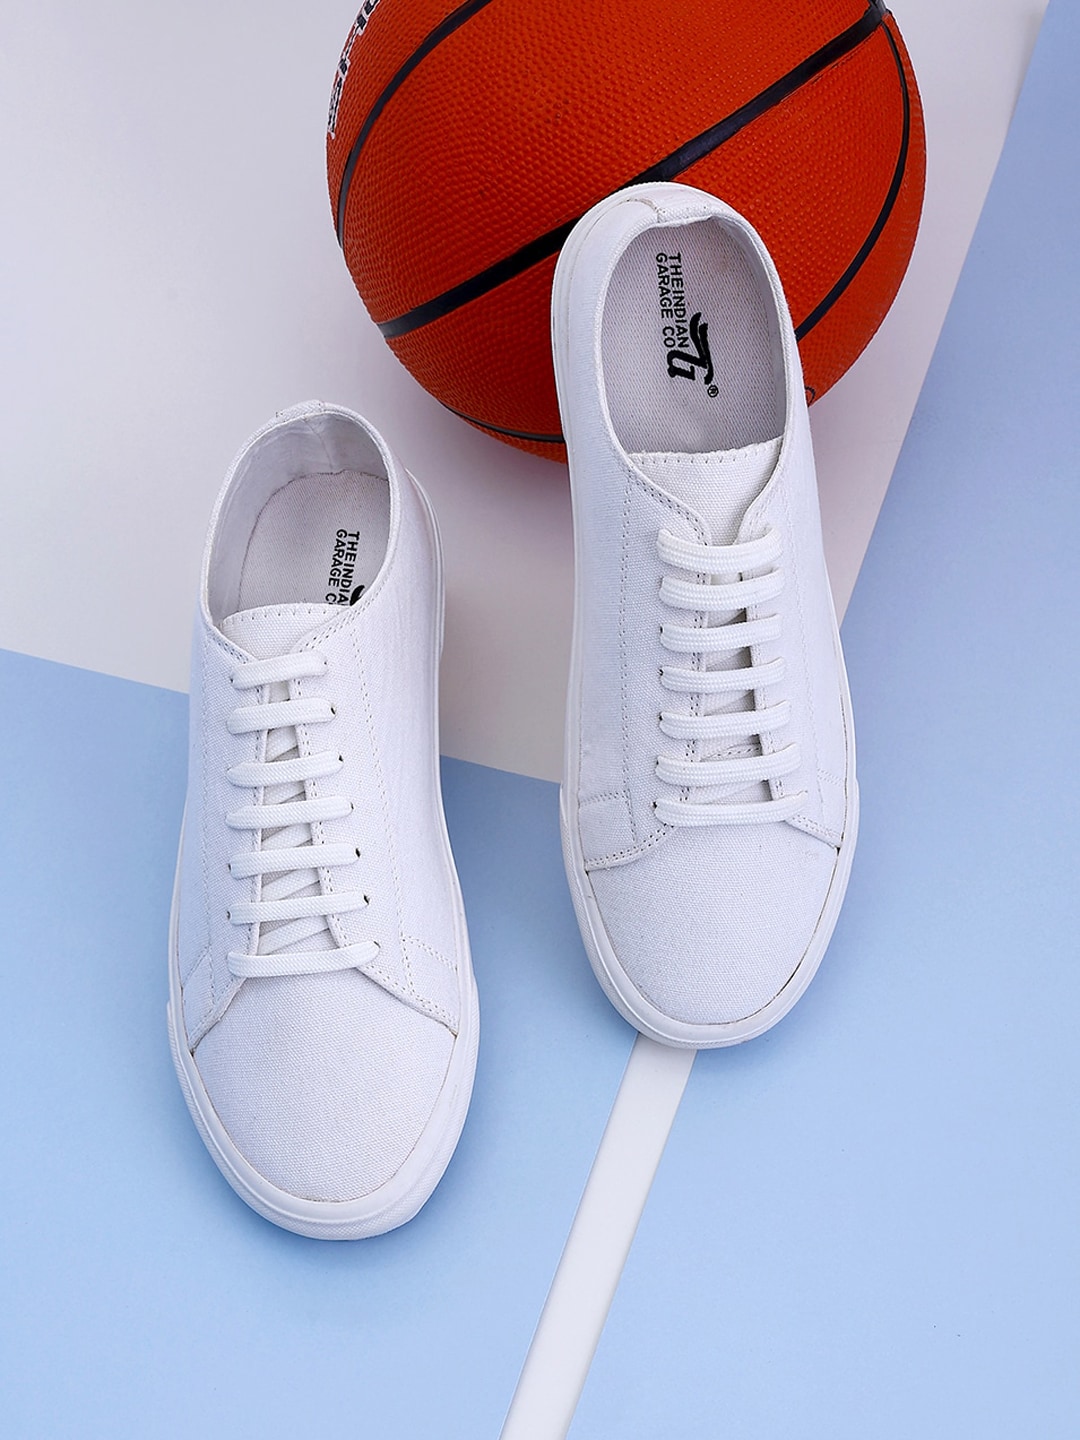 The Indian Garage Co Men White Round Toe Lace-Up Sneakers